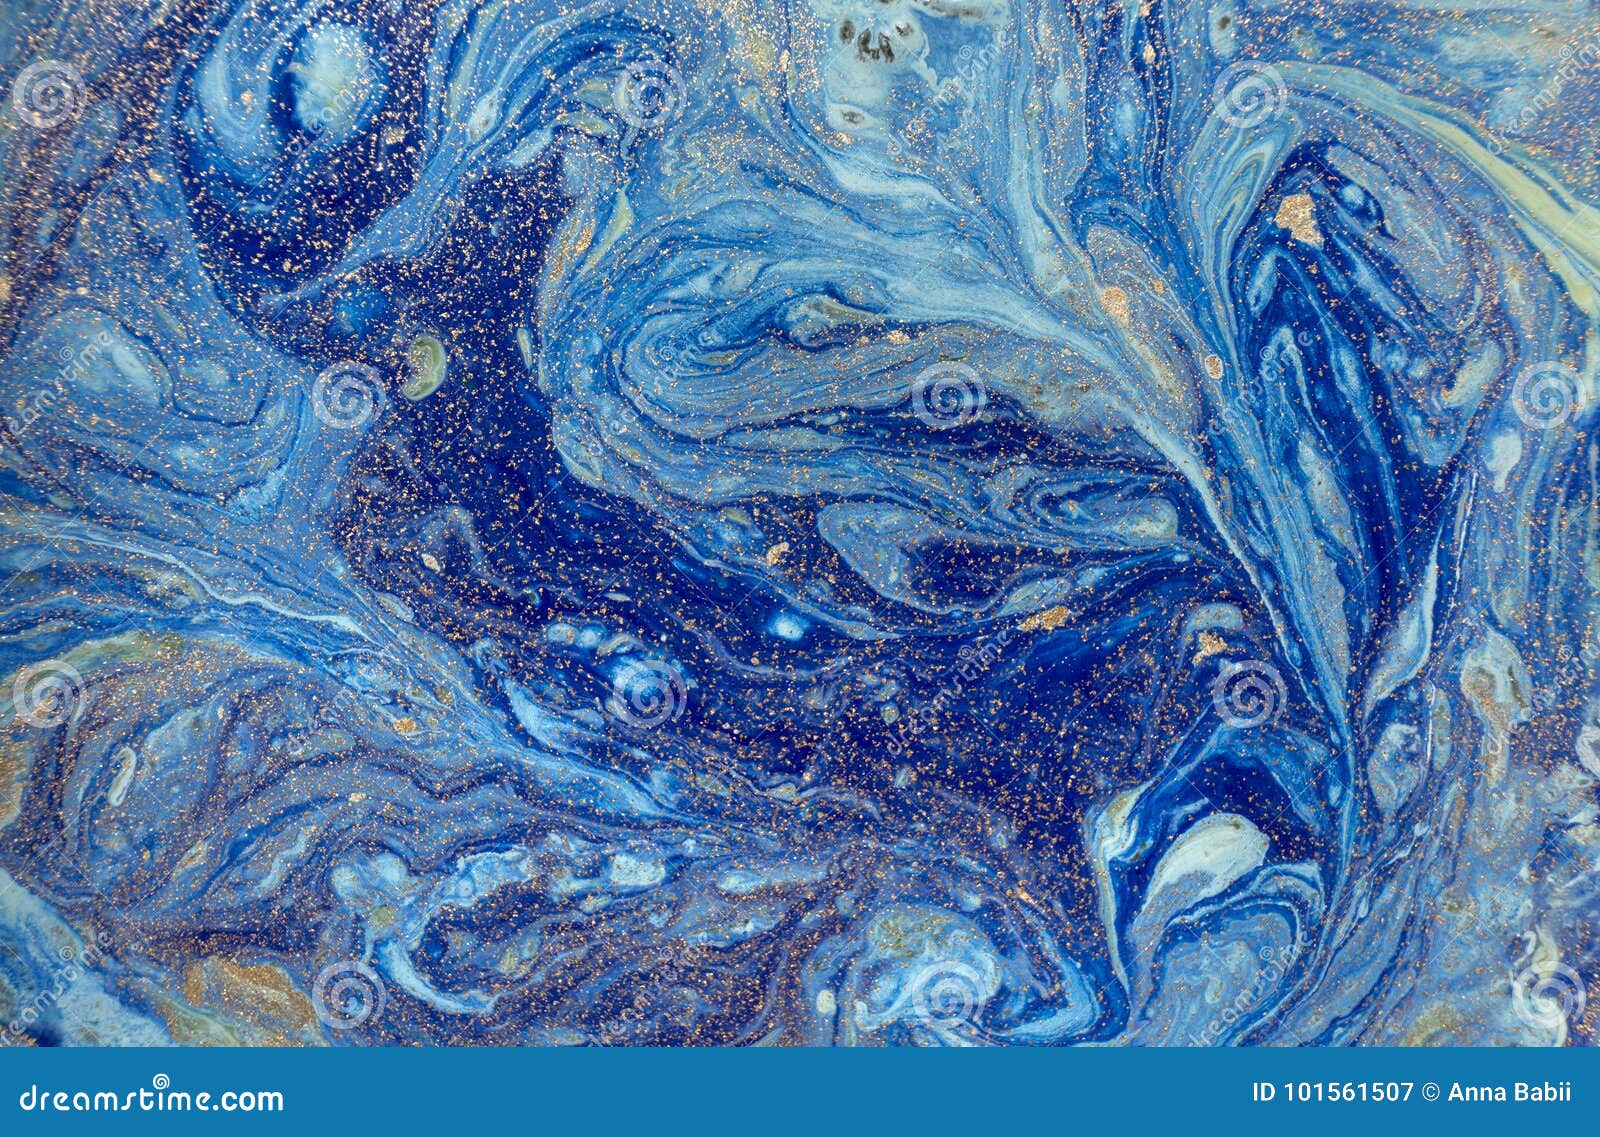 marbled blue abstract background with golden sequins. liquid marble ink pattern.